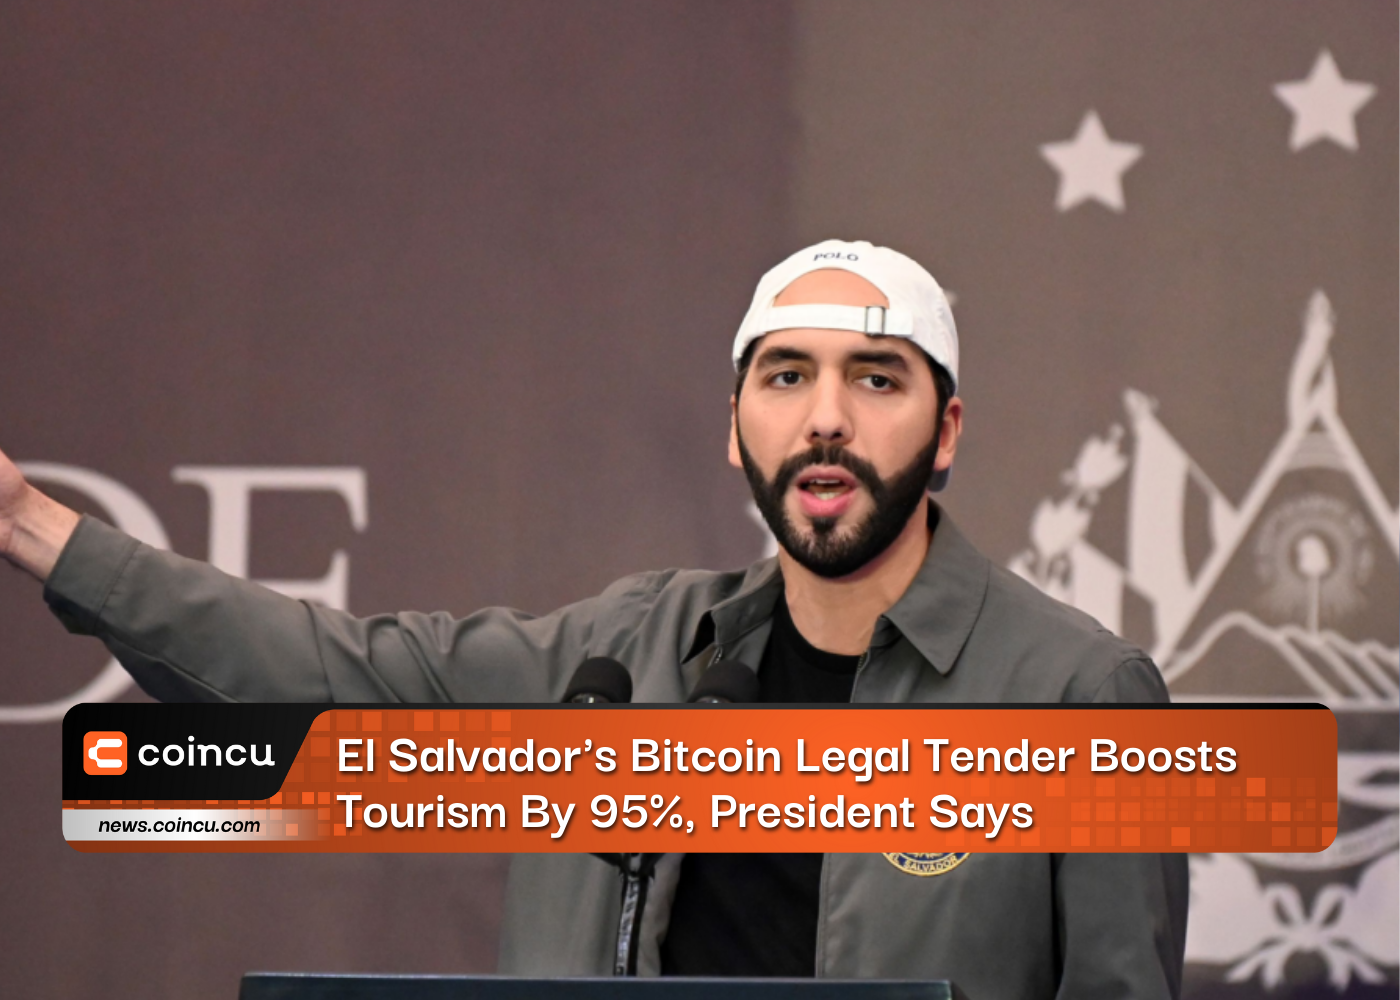 El Salvador's Bitcoin Legal Tender Boosts Tourism By 95%, President Says